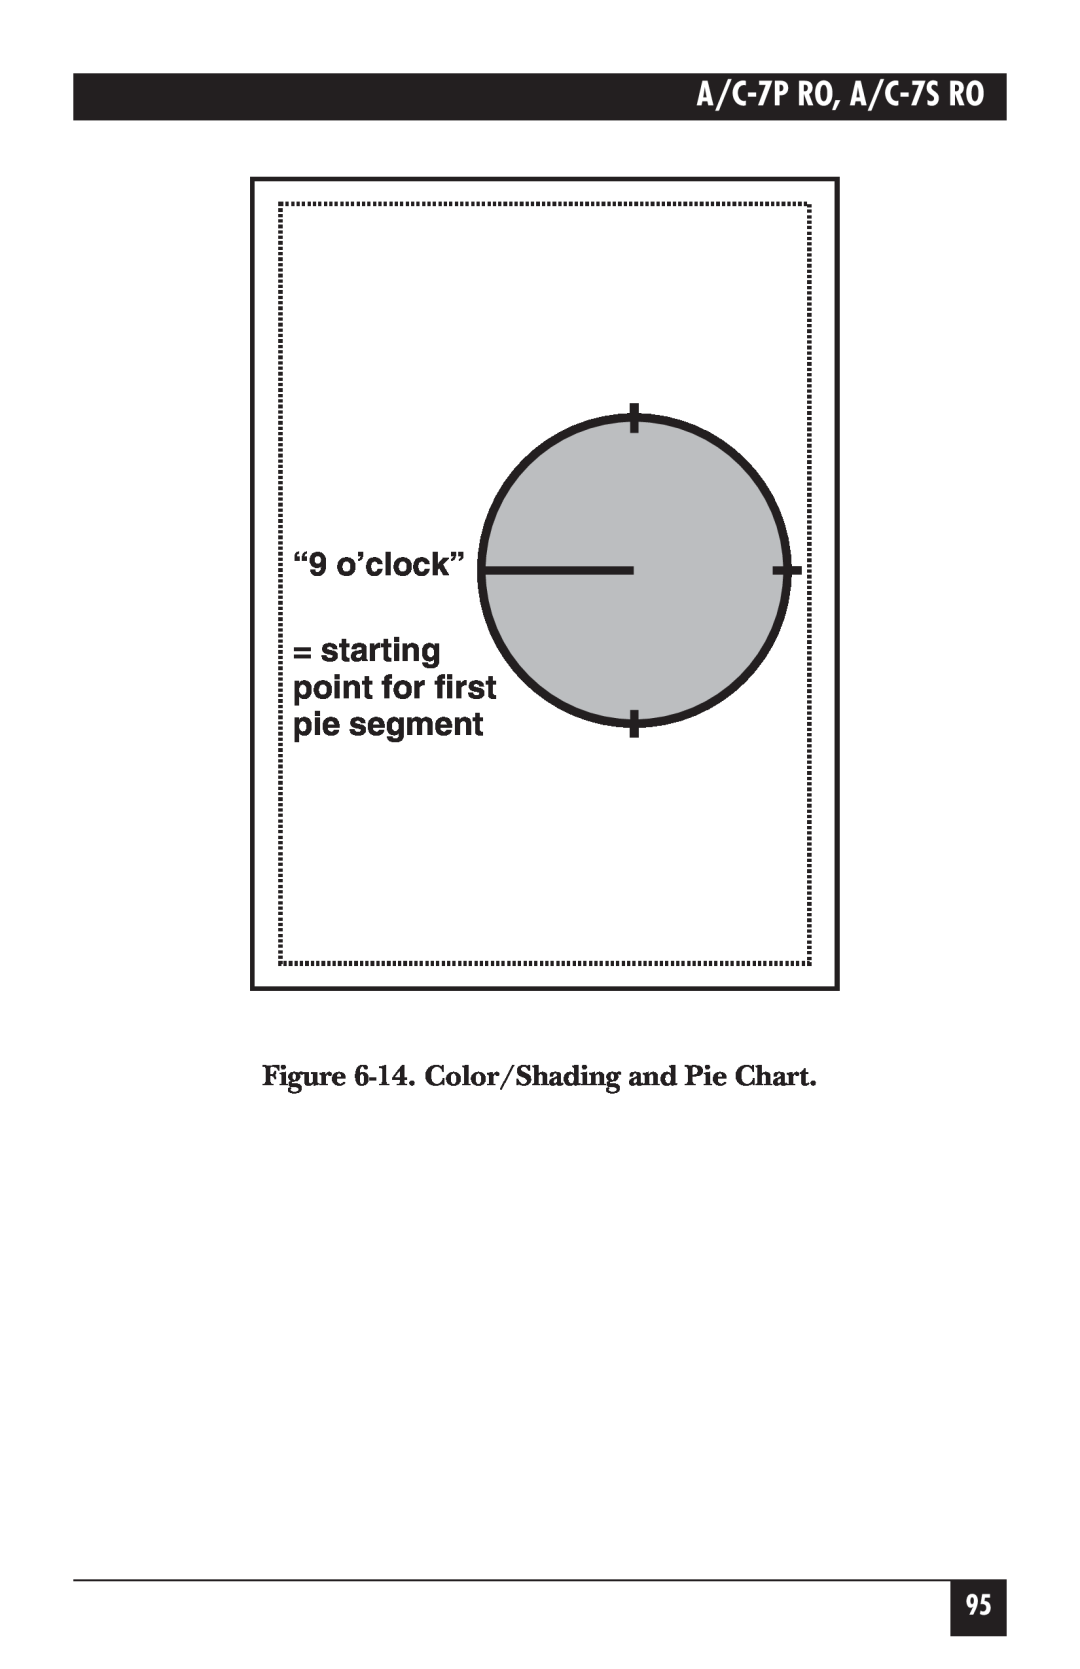 Black Box A/C-7S RO, A/C-7P RO manual “9 o’clock” = starting point for first pie segment, 14. Color/Shading and Pie Chart 